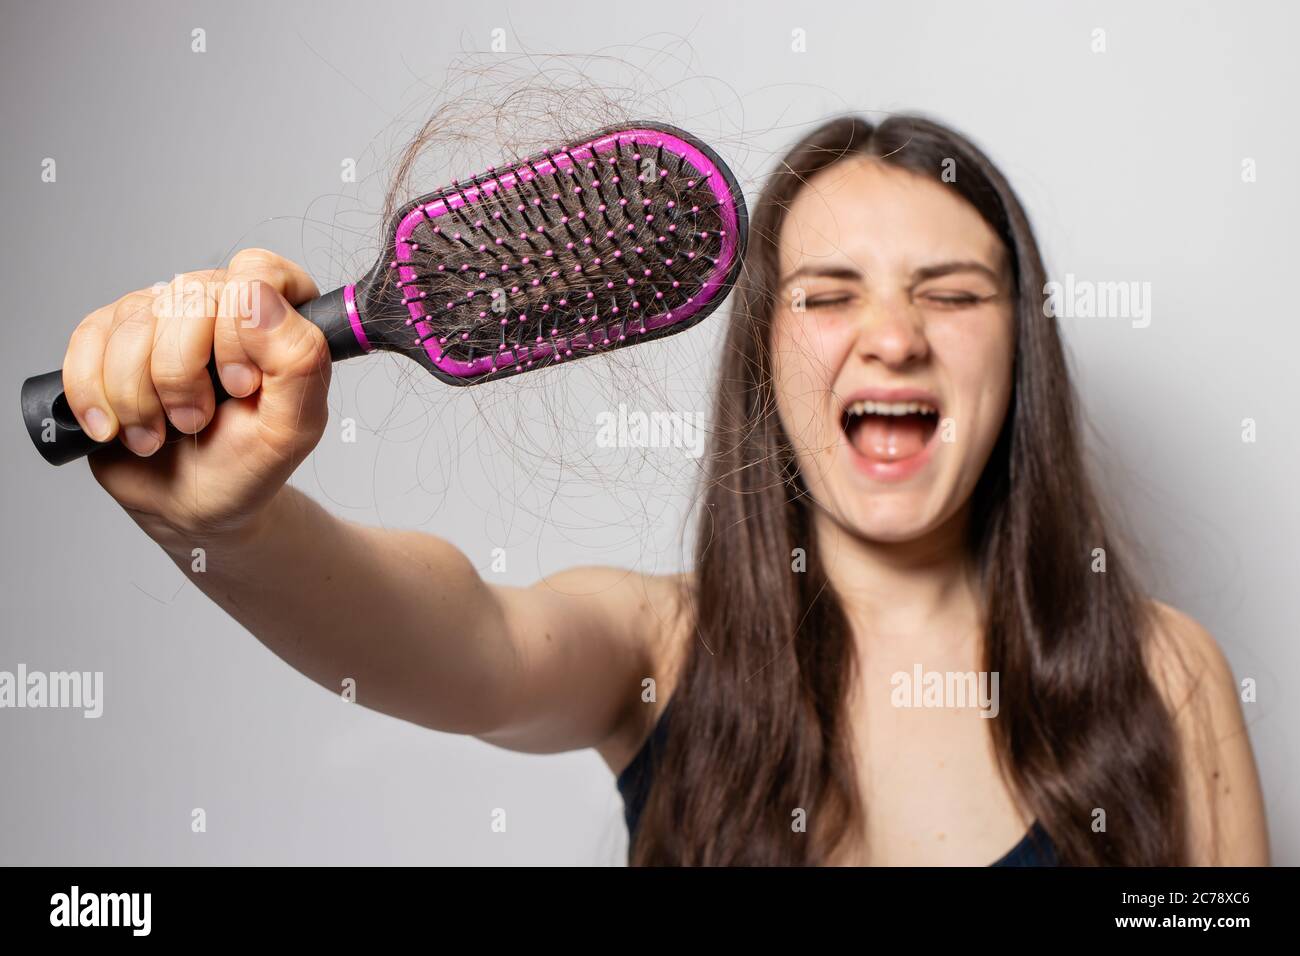 The girl holds a comb for hair with fallen hair. Hair loss, hair care. Stock Photo